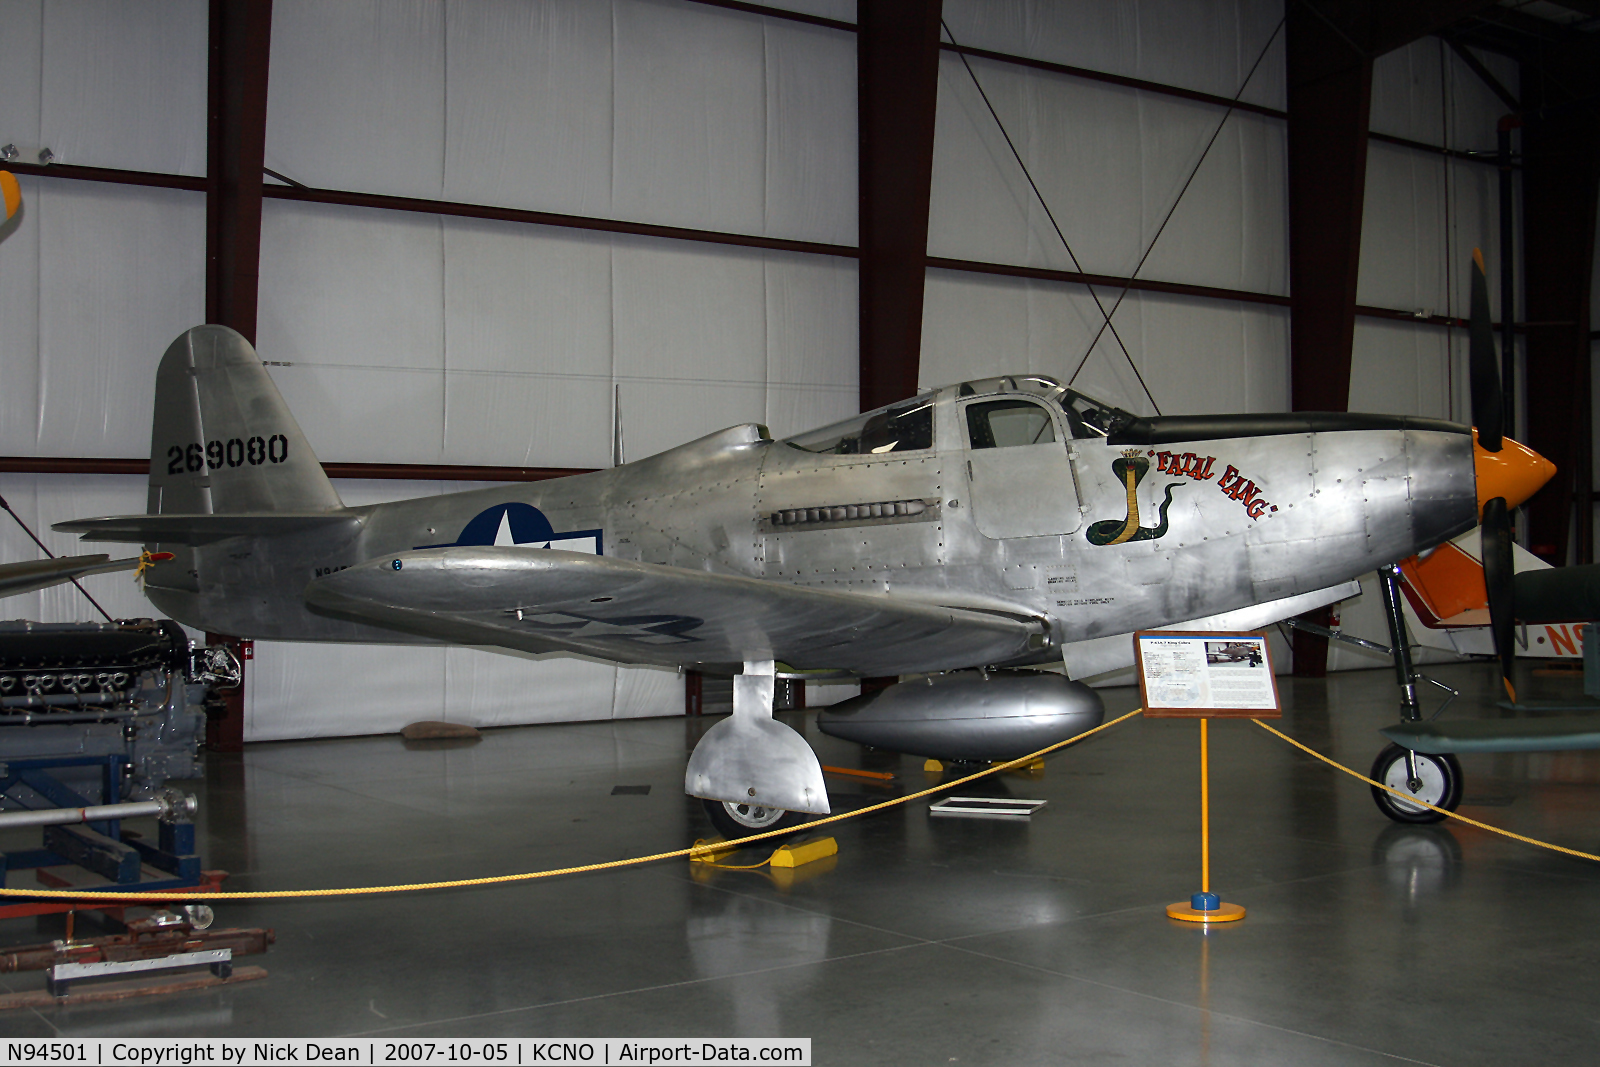 N94501, 1943 Bell P-63C Kingcobra C/N 42-69080, No C/N available for this aircraft